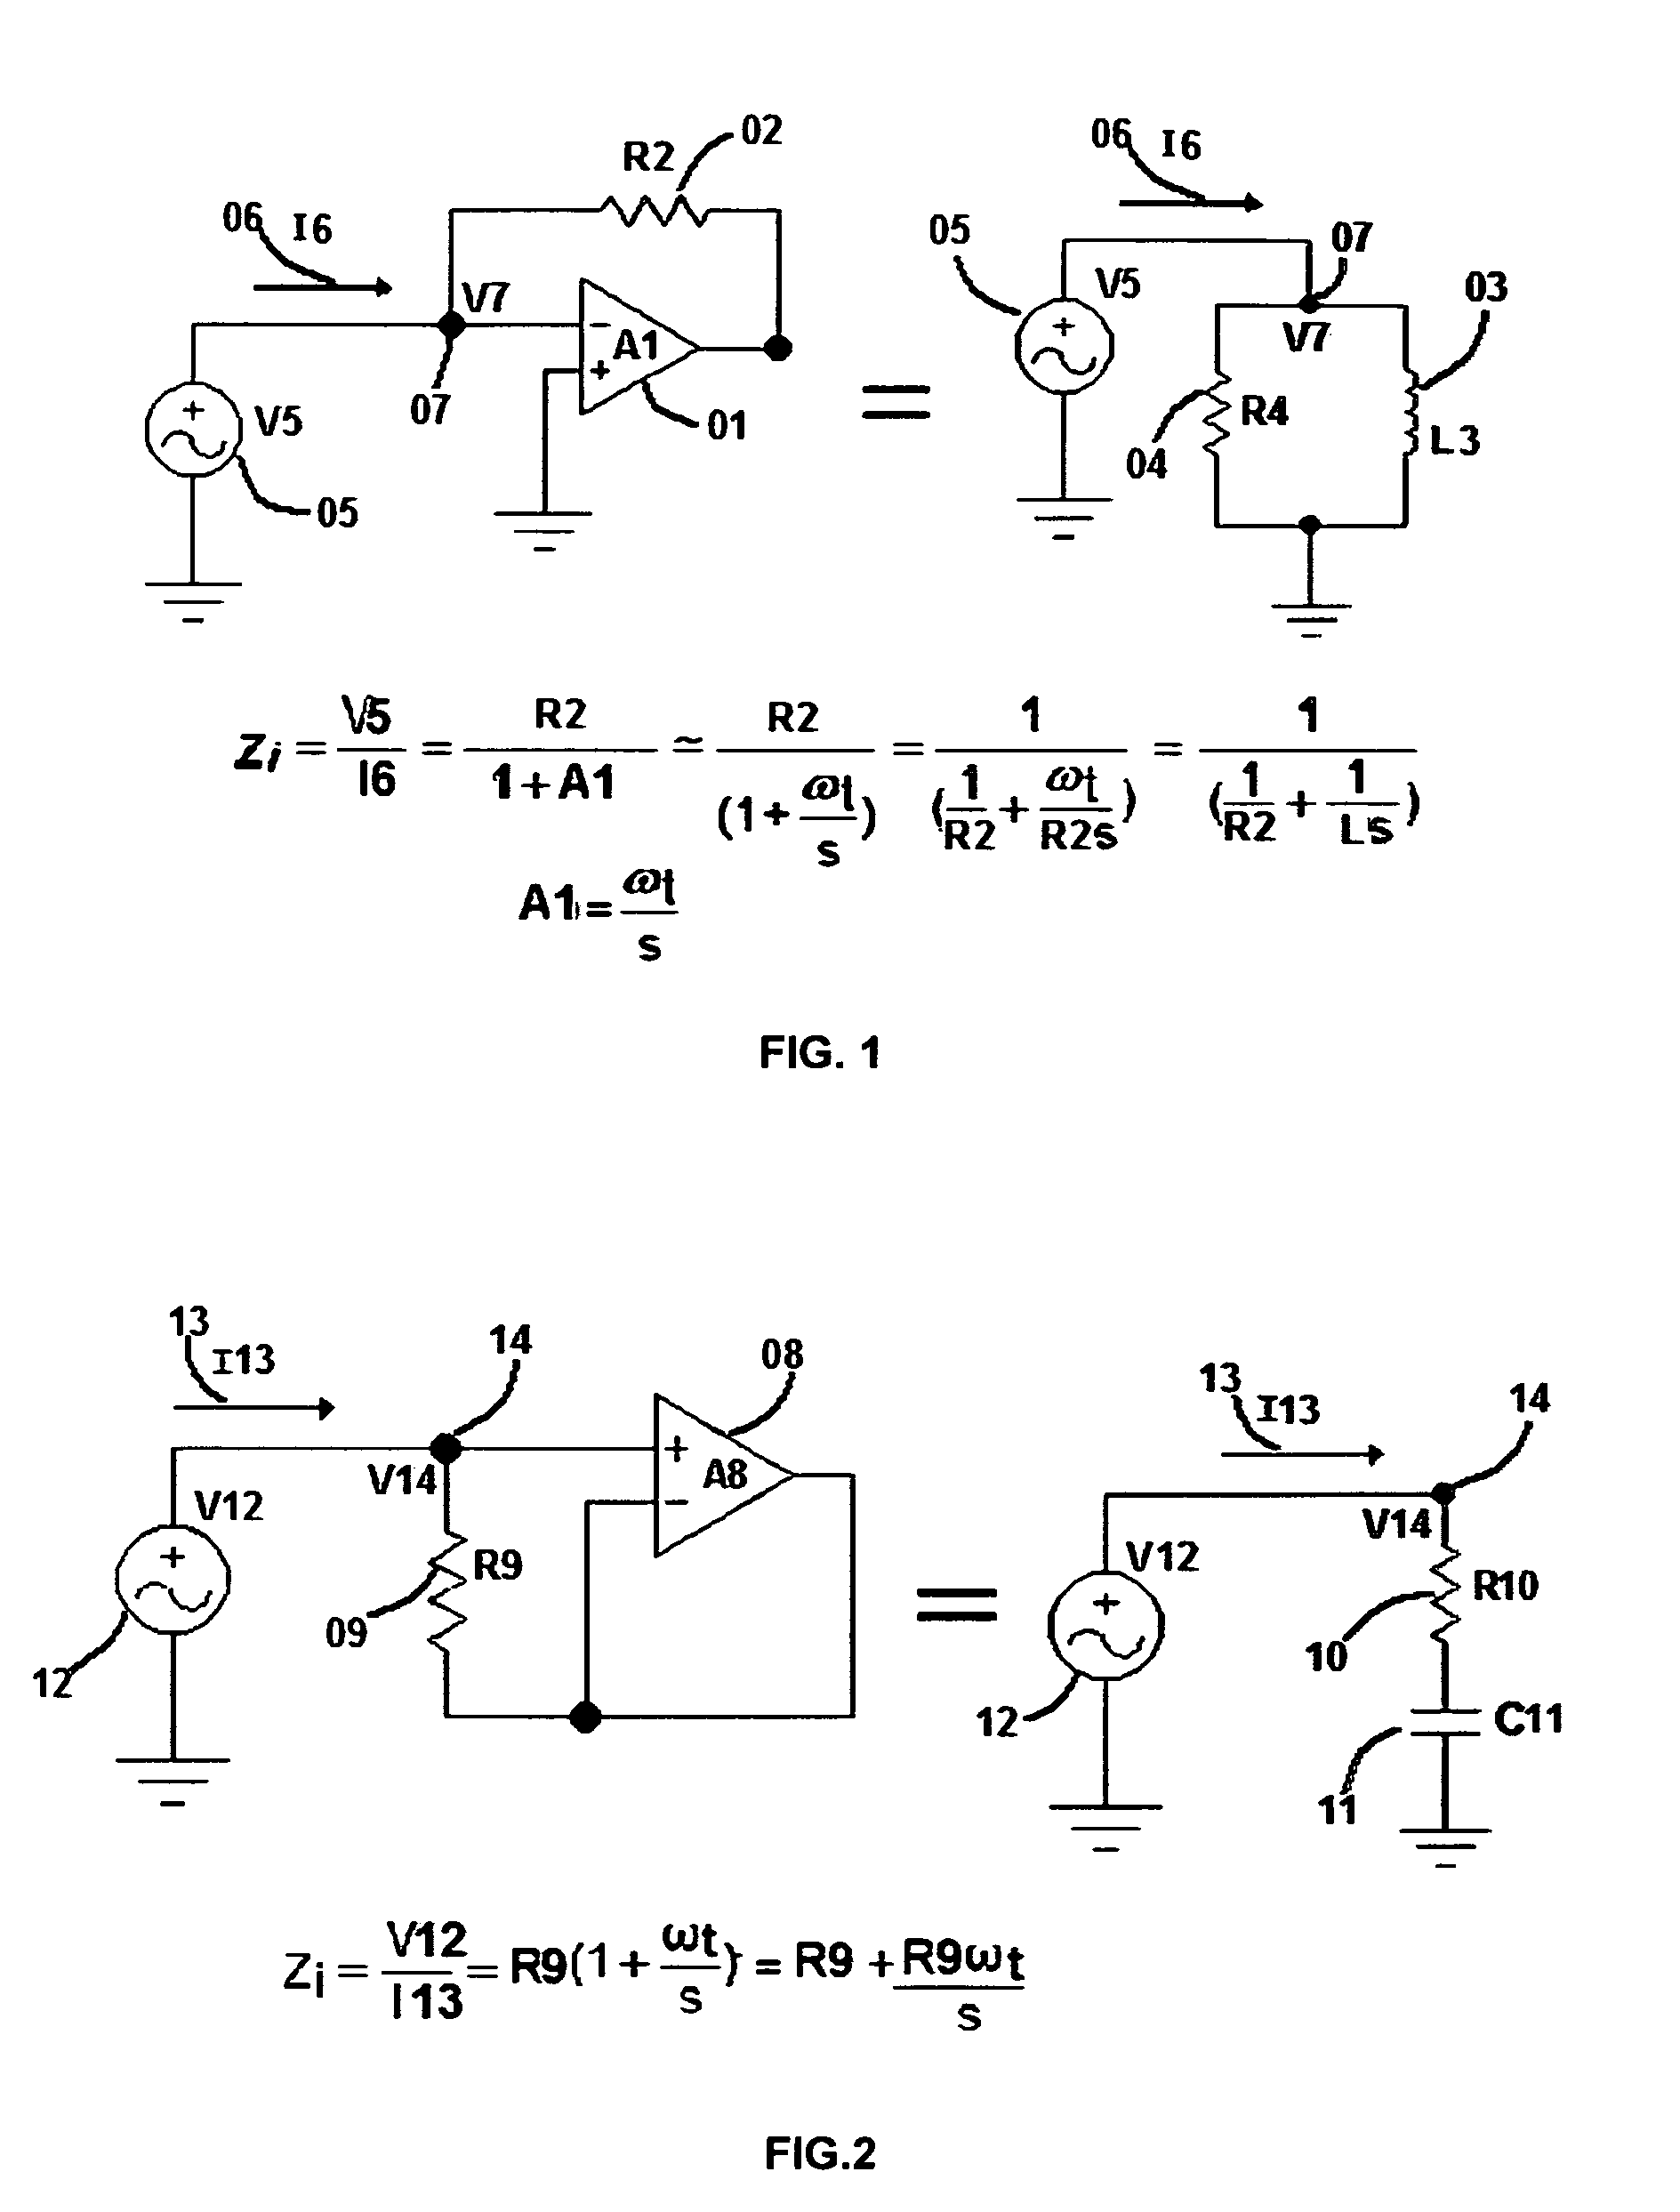 Op-R, a solid state filter